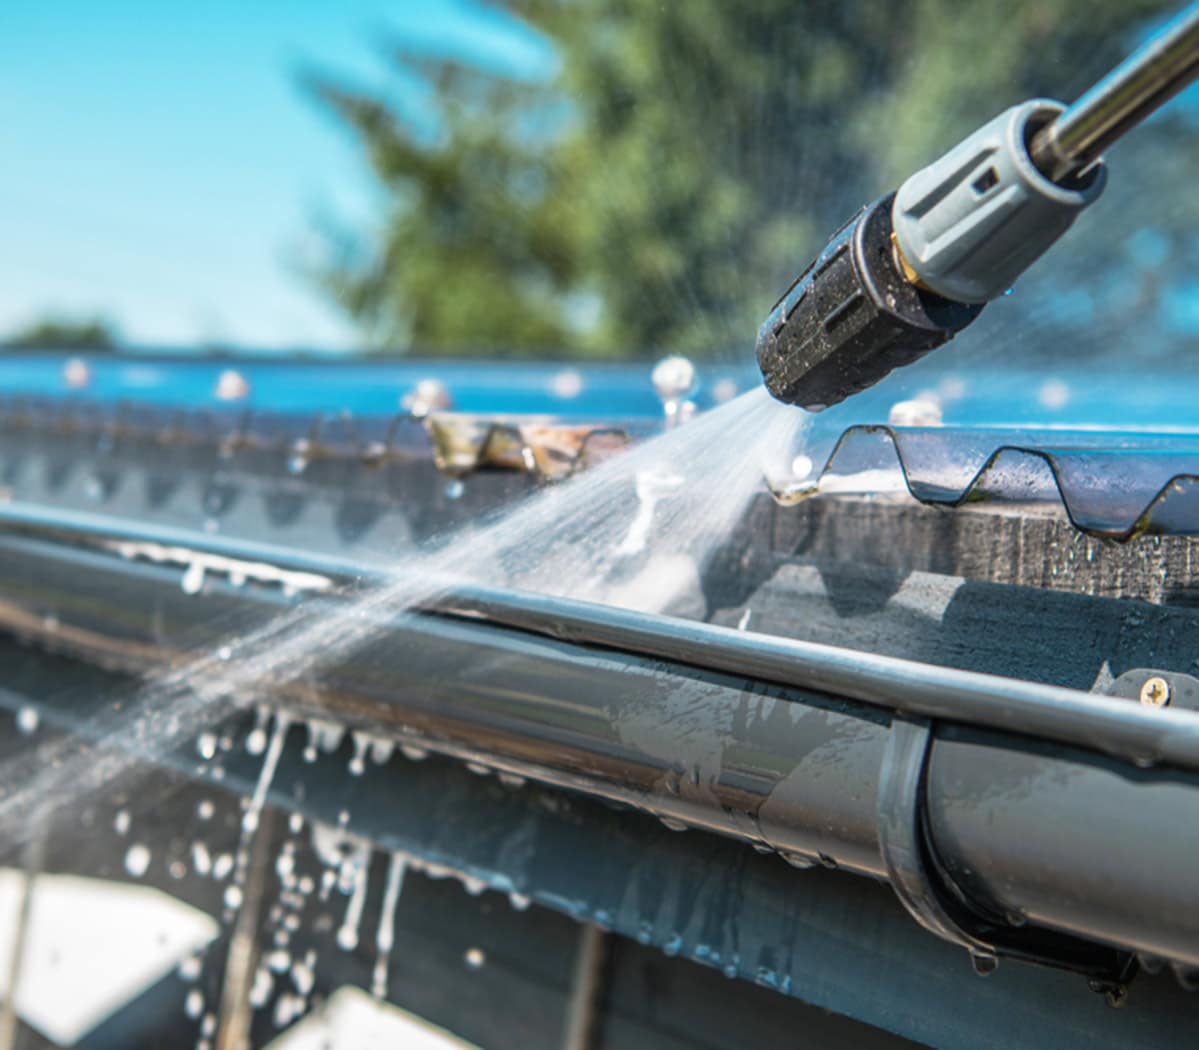 Cleaning the Gutter with Water Pressure in Bathurst, NSW